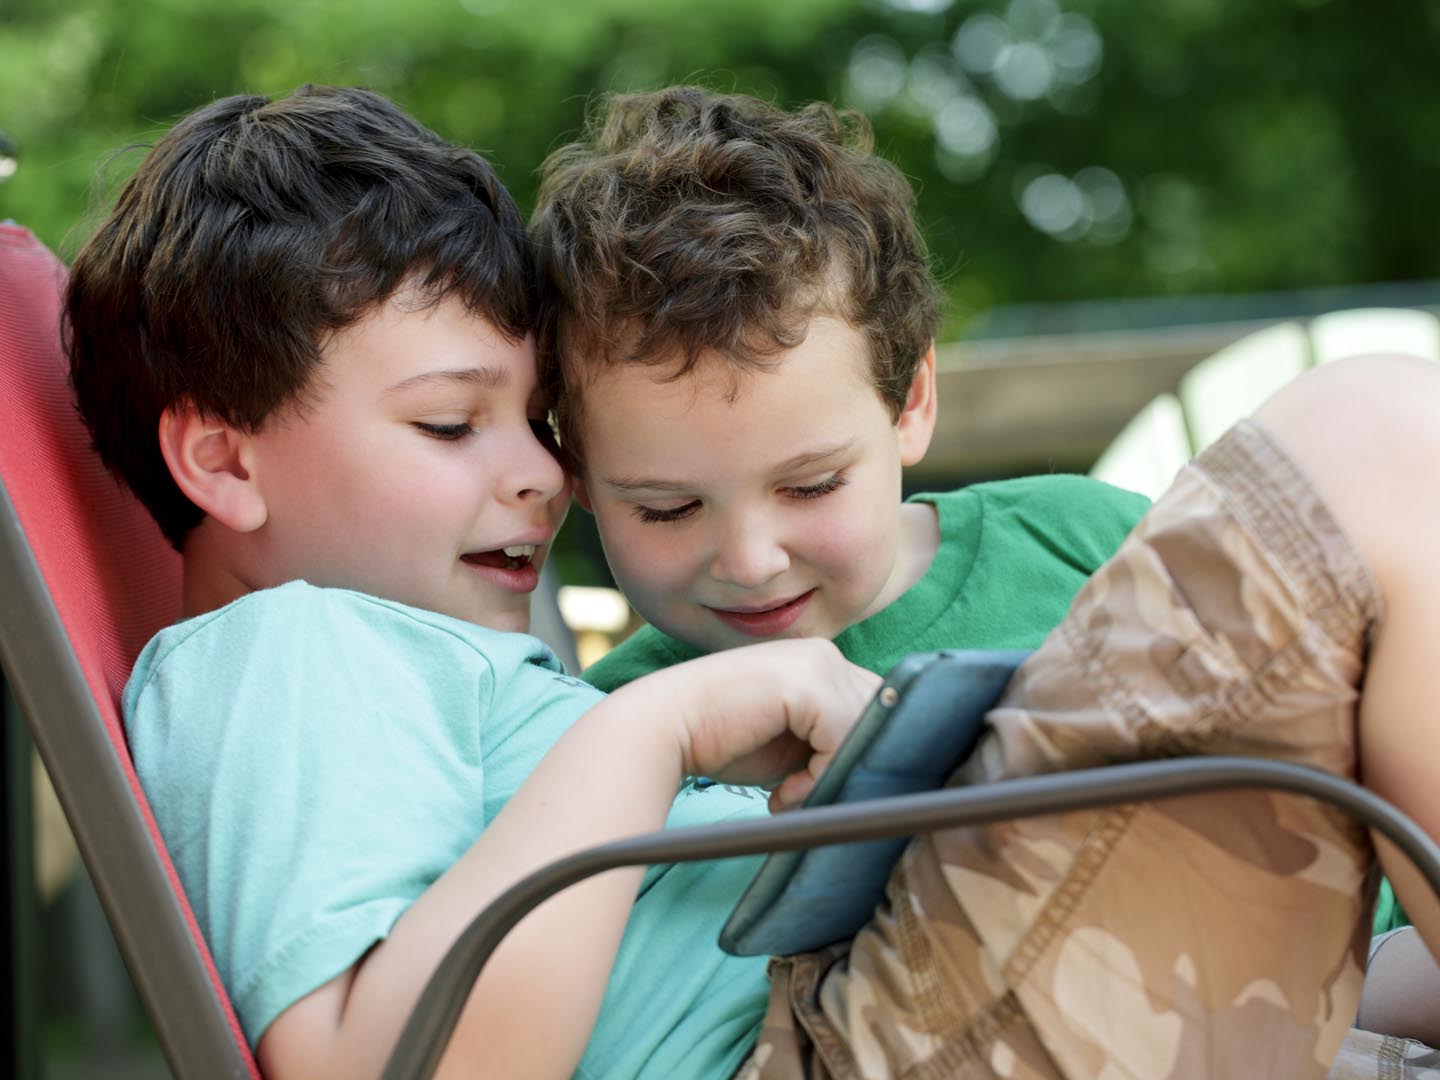 Two boys with special needs find they can tolerate closeness and sharing while engaged with apps on a computer tablet such as an iPad.